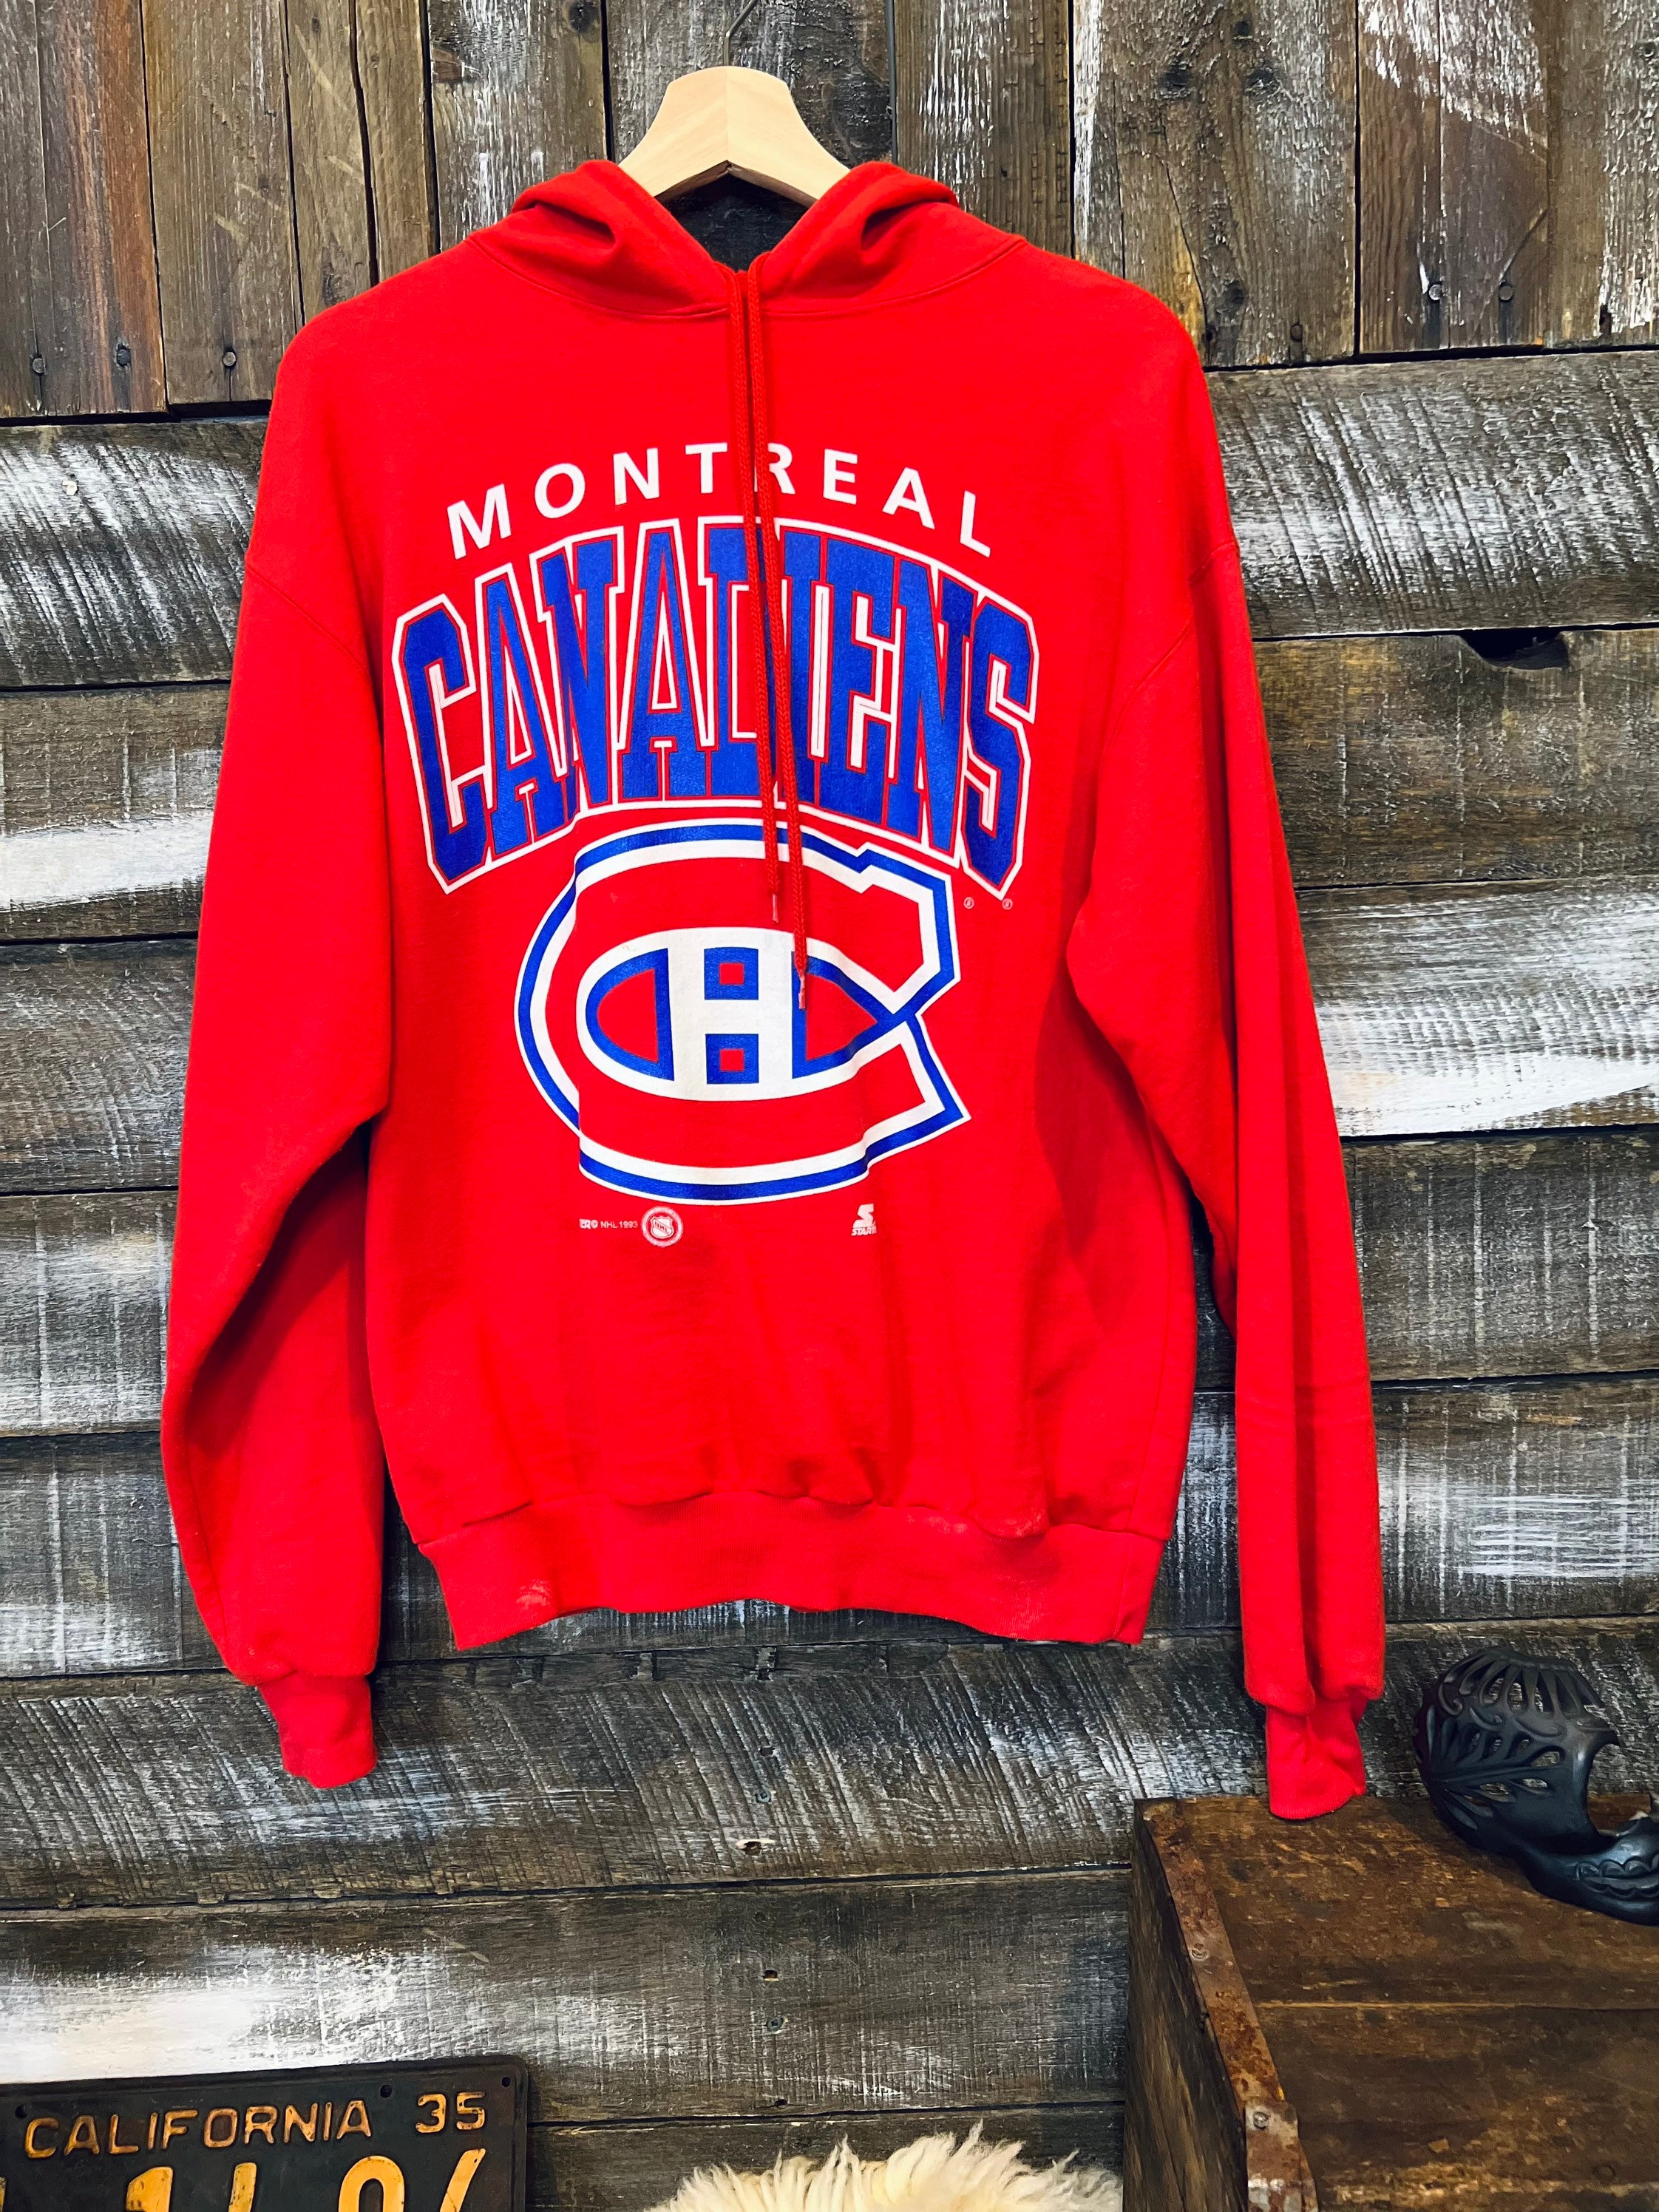 CCM VINTAGE HOCKEY MONTREAL CANADIENS JERSEY SIZE XL - Able Auctions